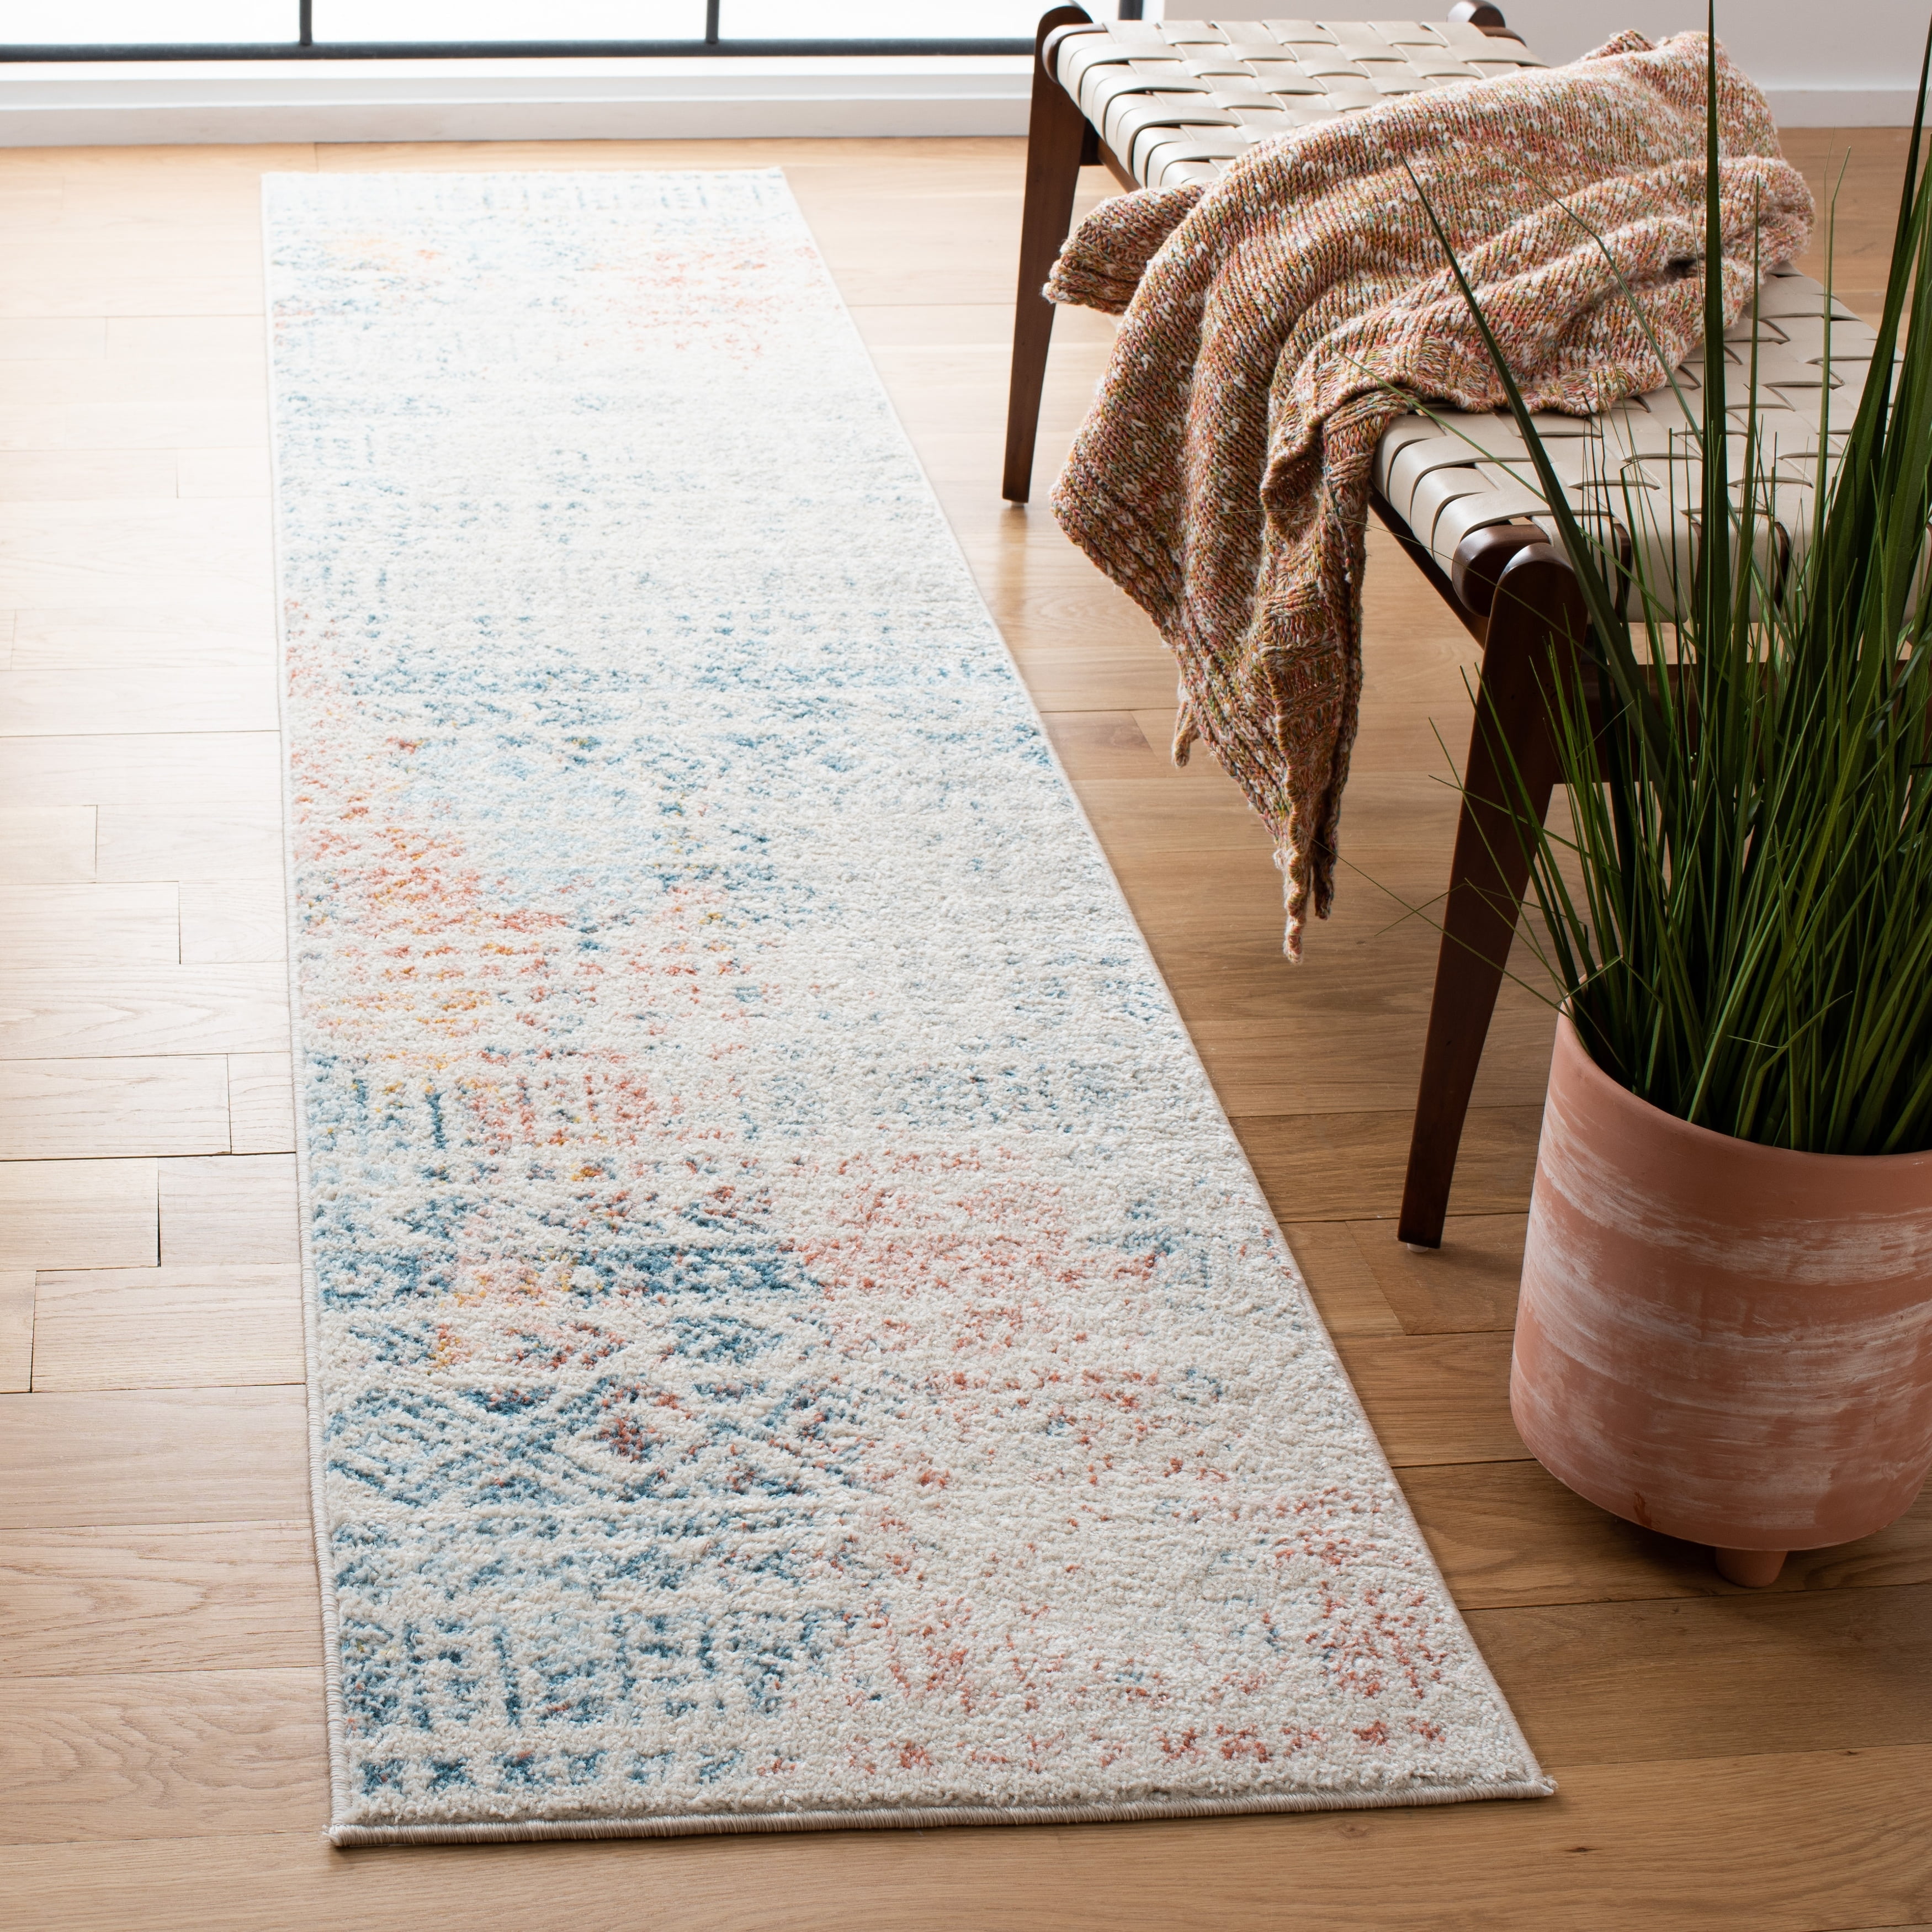 Abysse Caress Ivory Square Rug